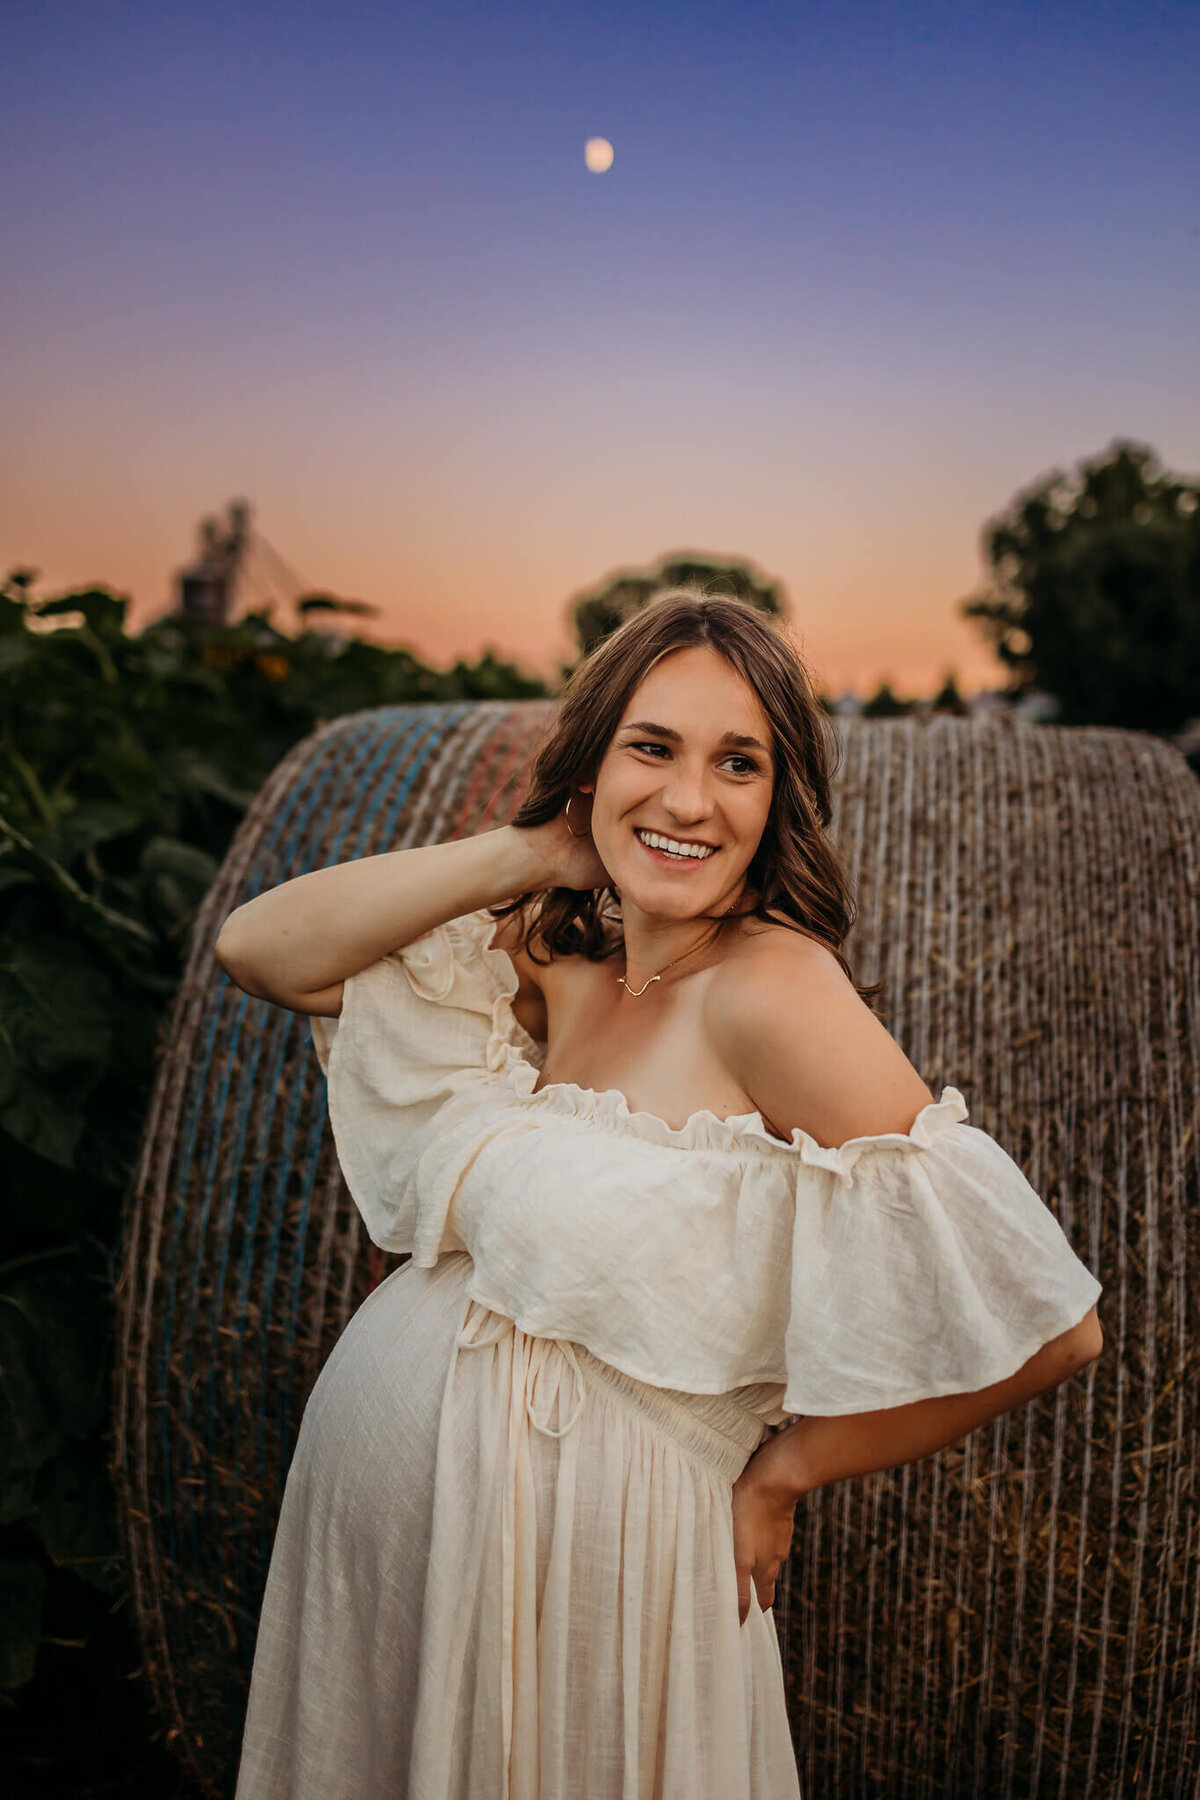 Goldend hour sunset farm maternity session